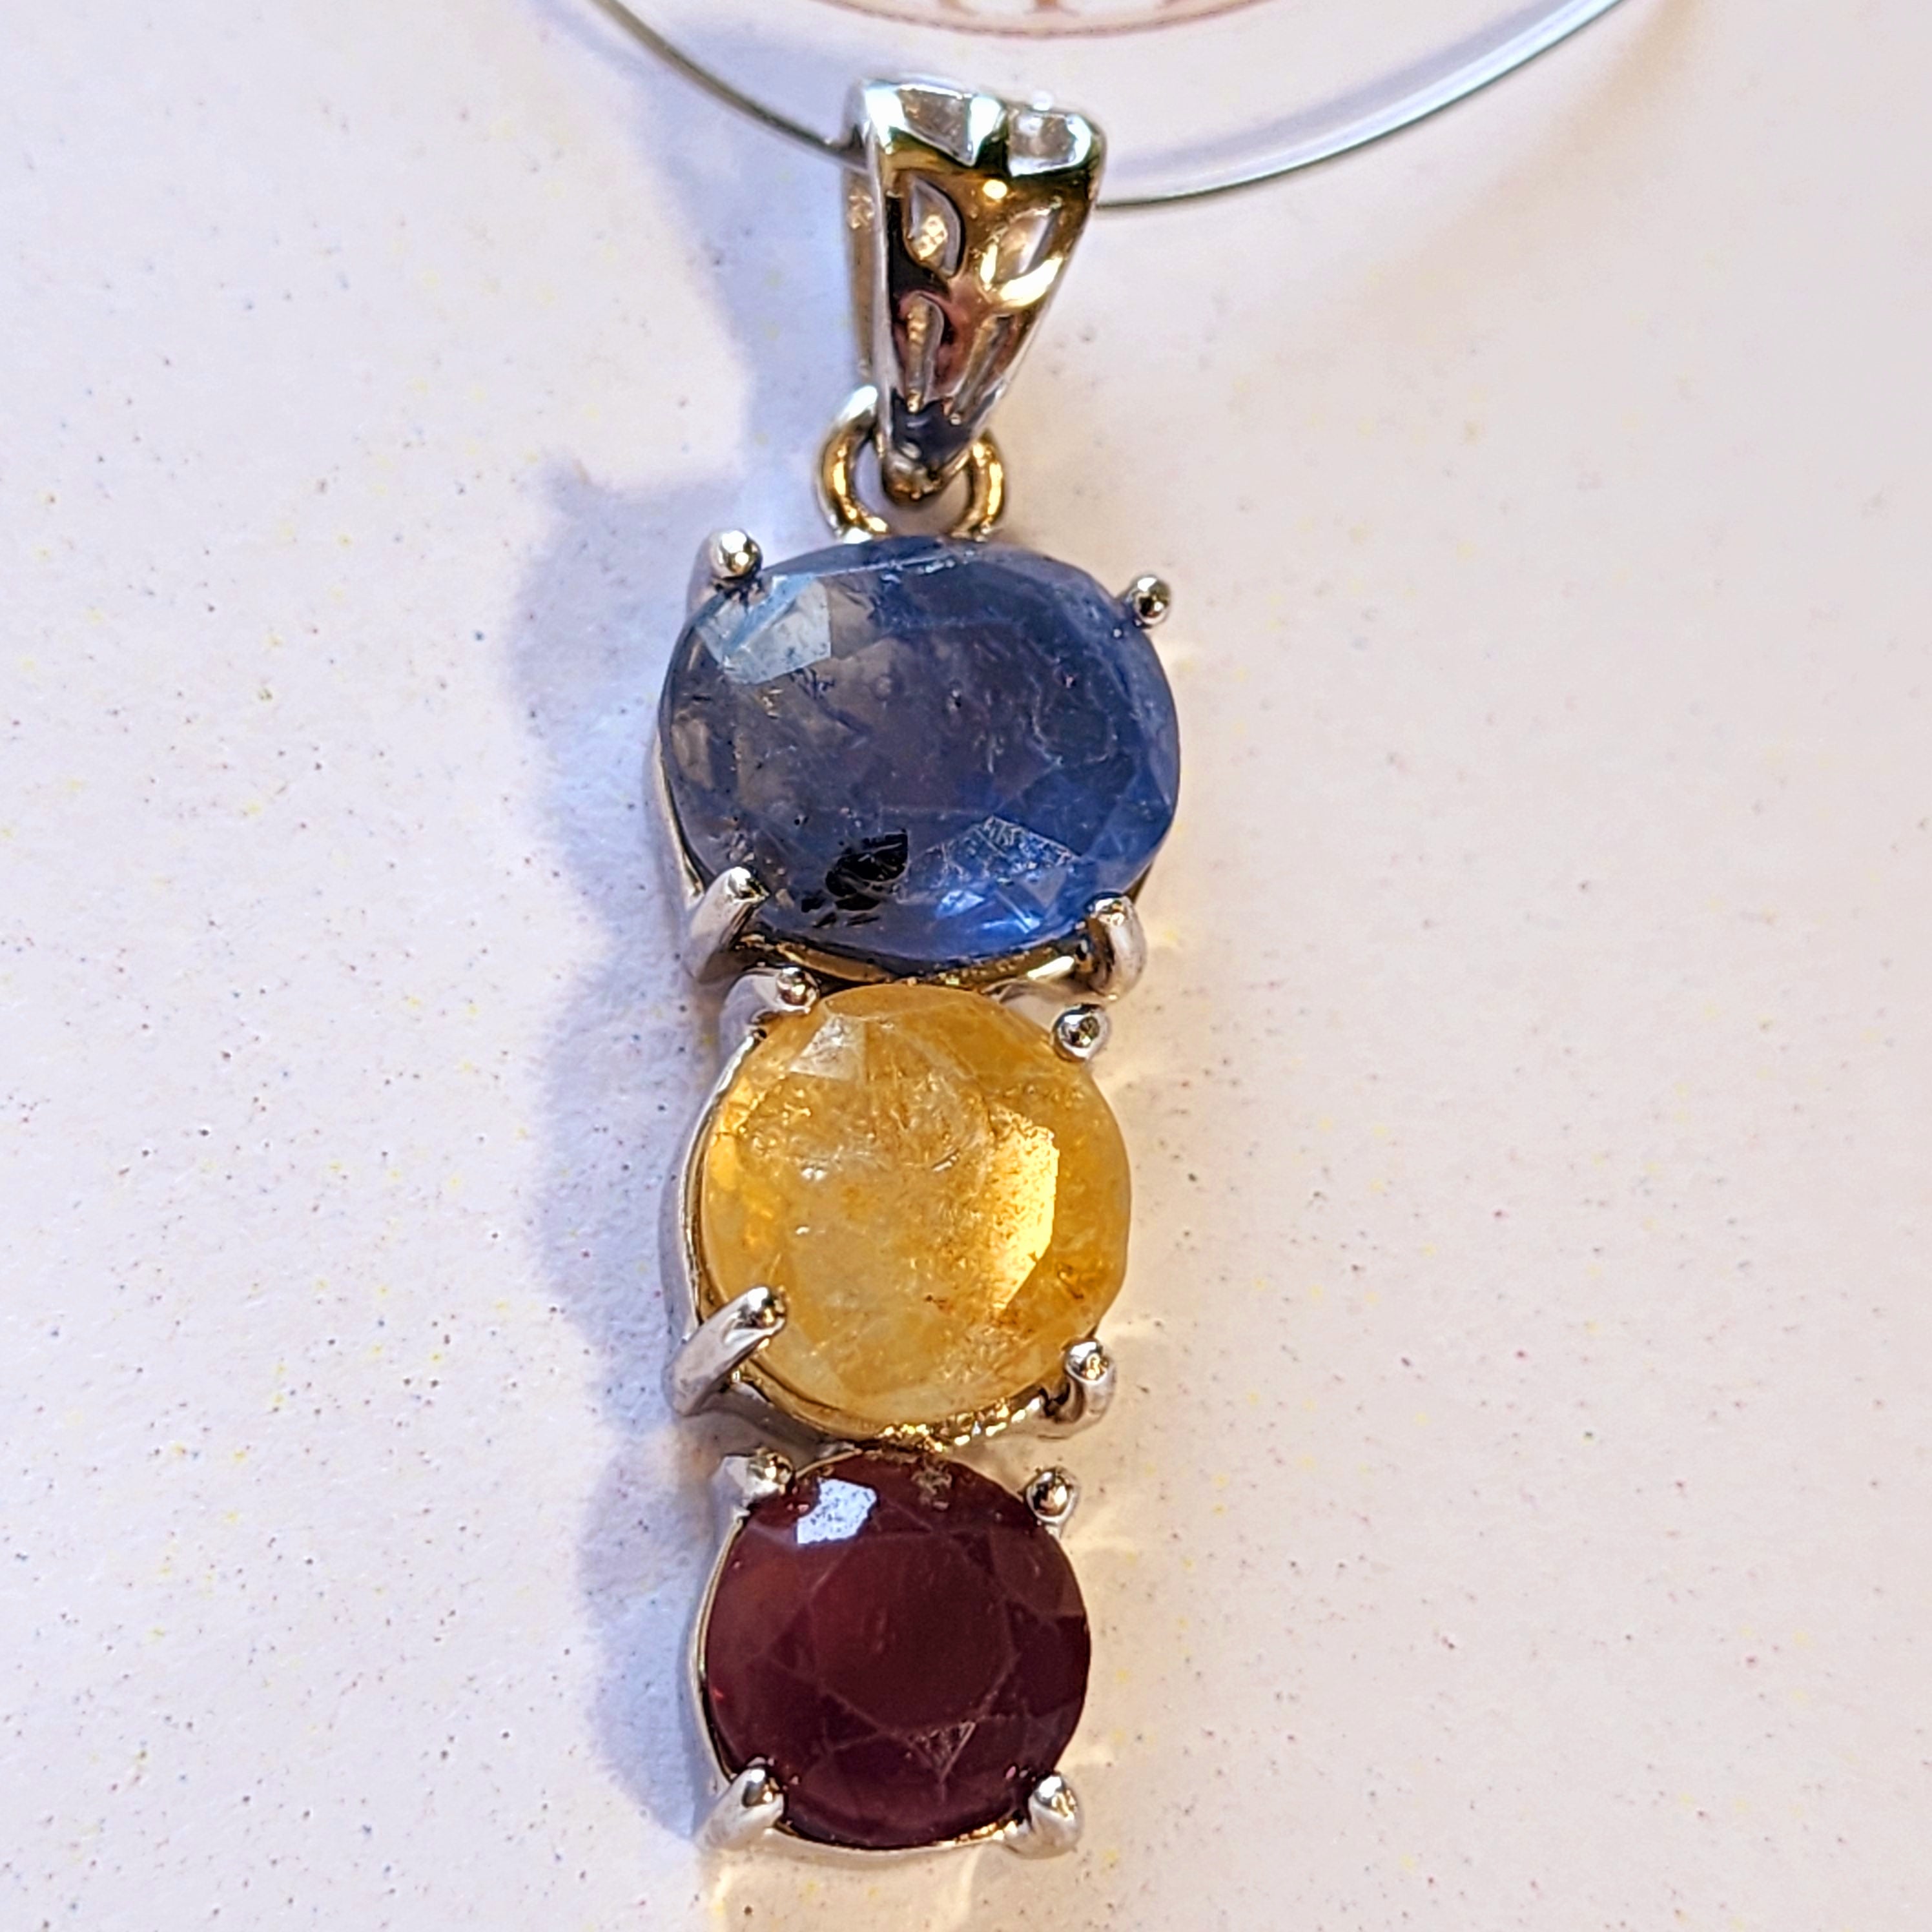 Corundum Dream Ruby, Blue Sapphire & Yellow Sapphire .925 Silver Pendant for Intuition, Good Luck and Revitalizing your Passion for Life